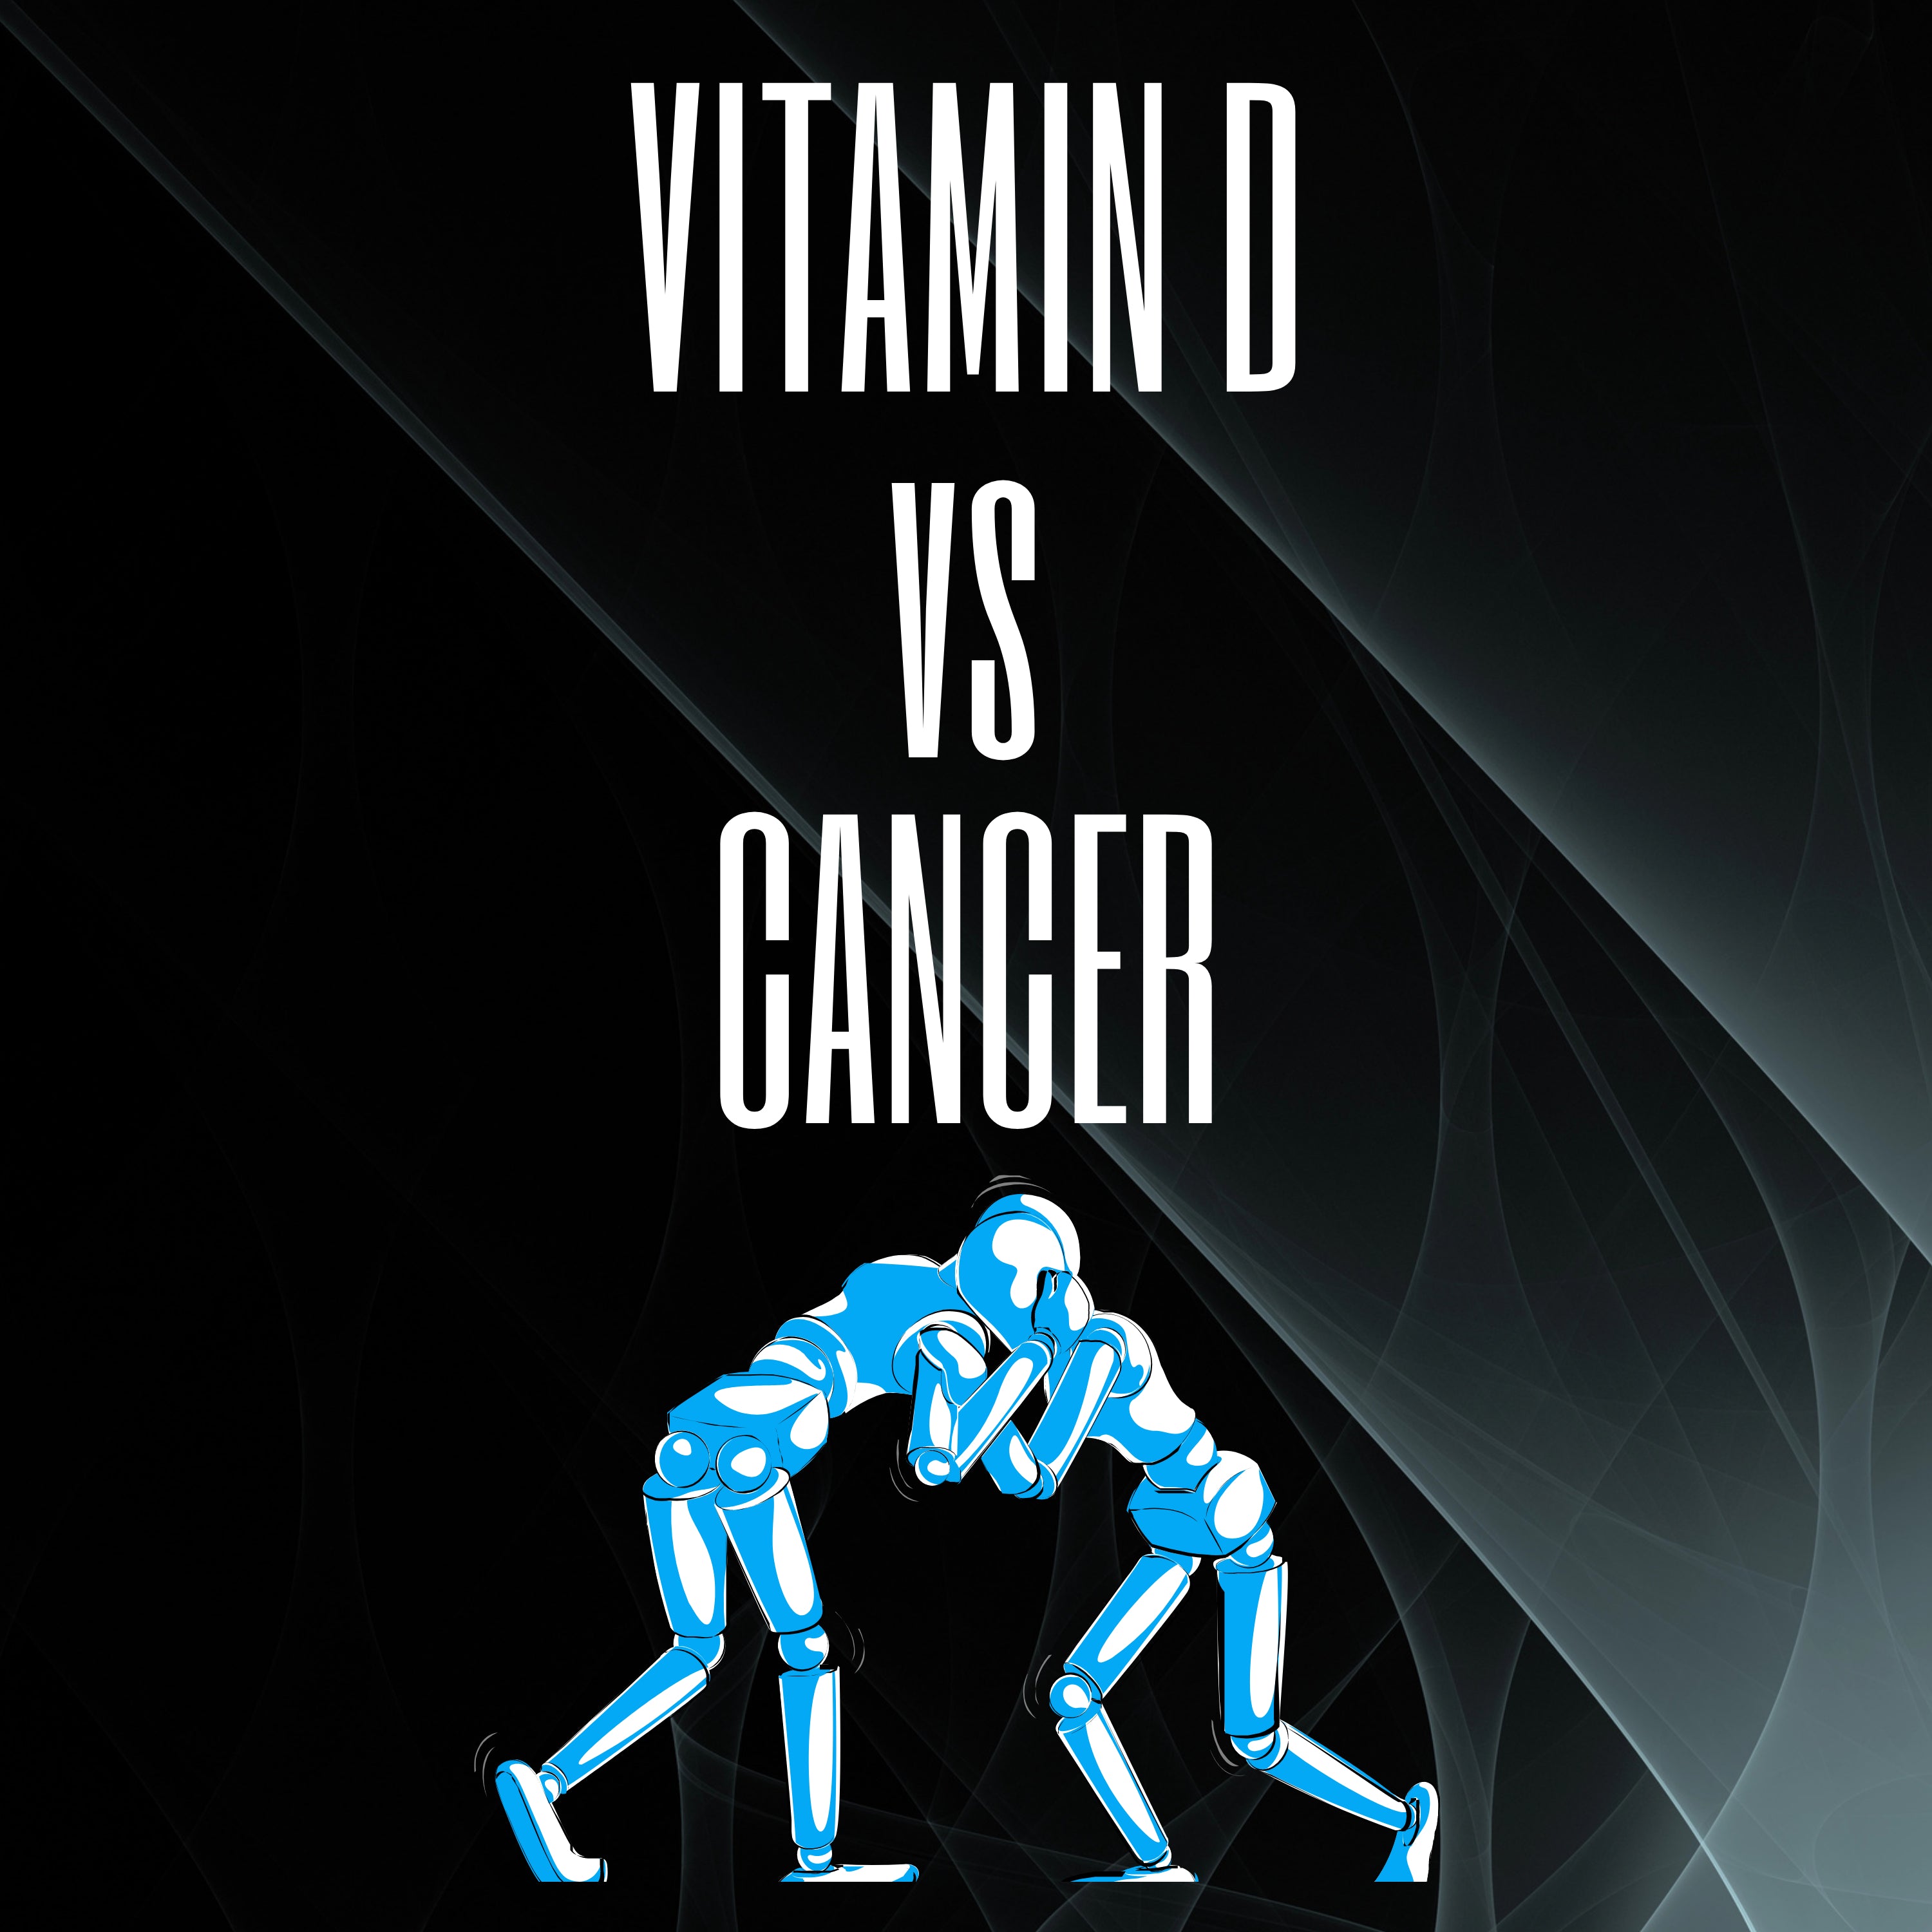 Vitamin D and Cancer Prevention?